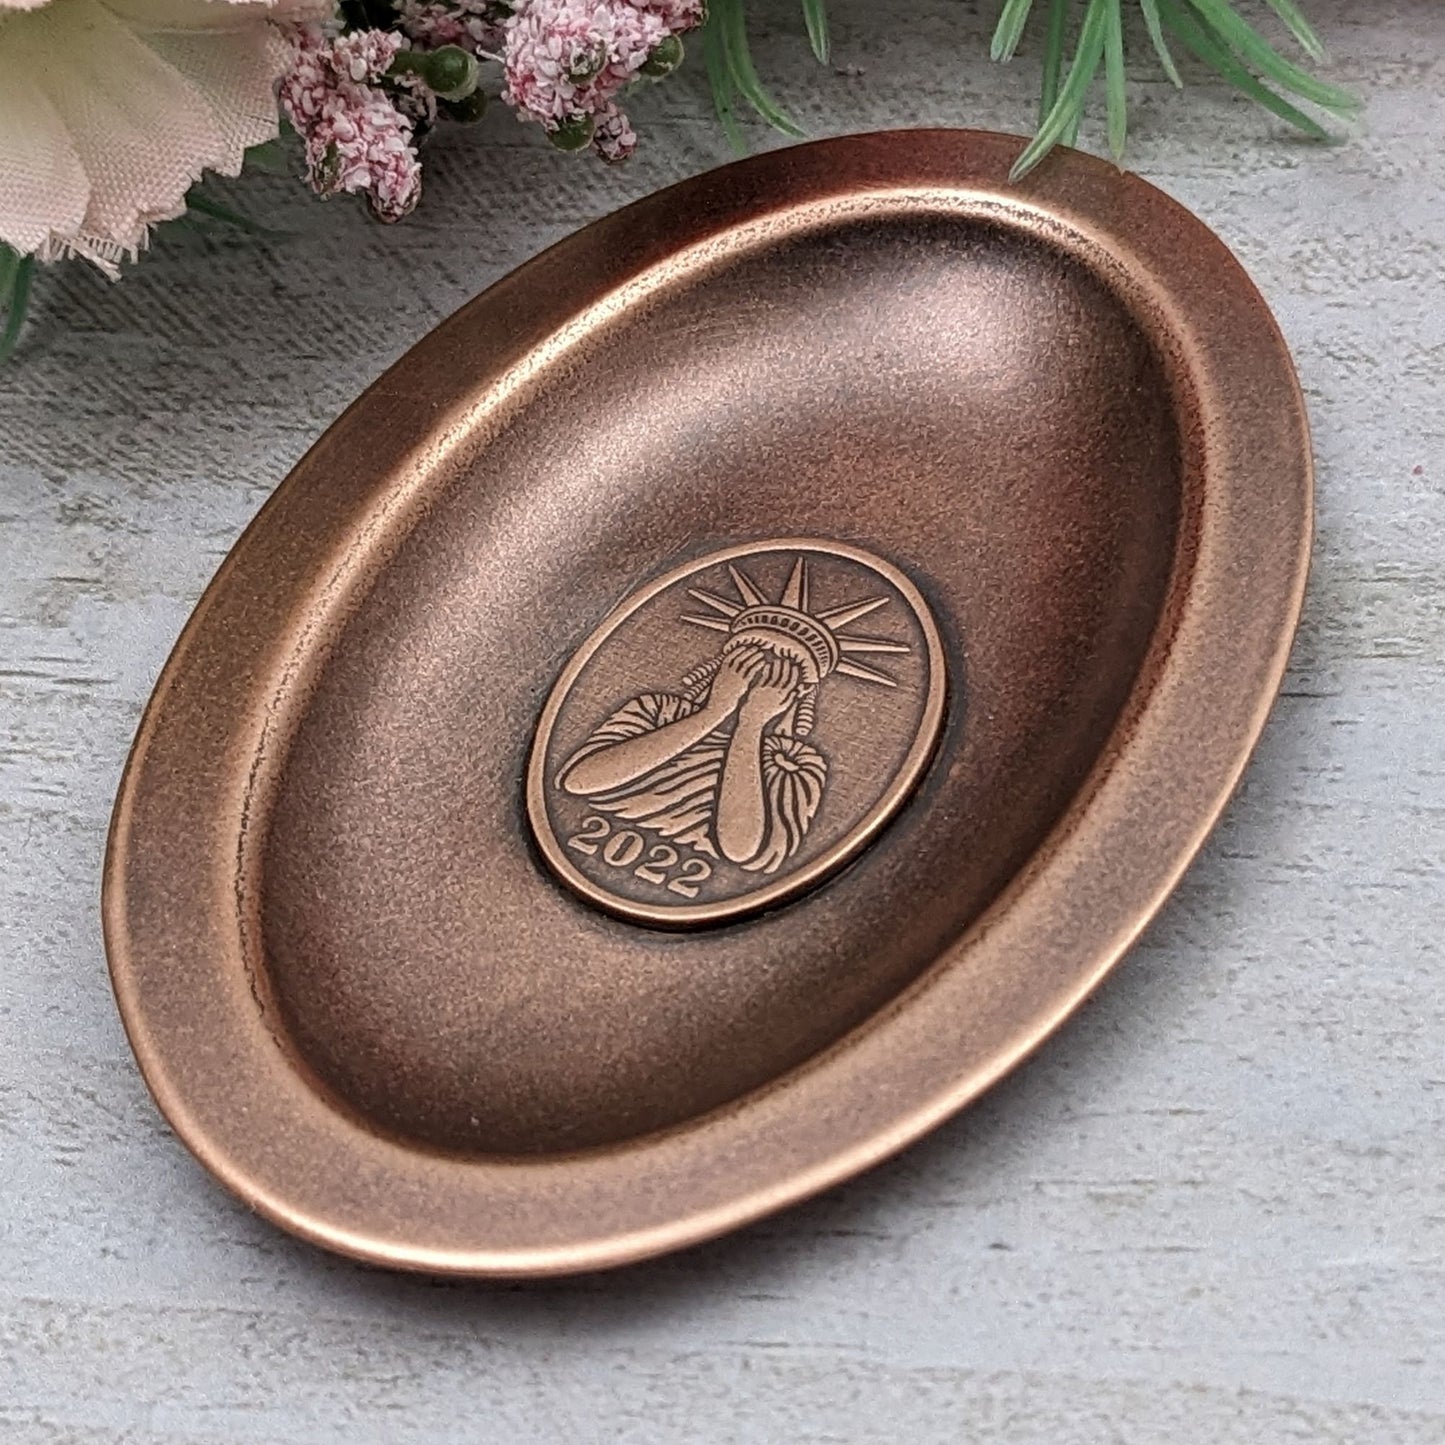 Crying Liberty 2022 Copper Oval Ring Dish